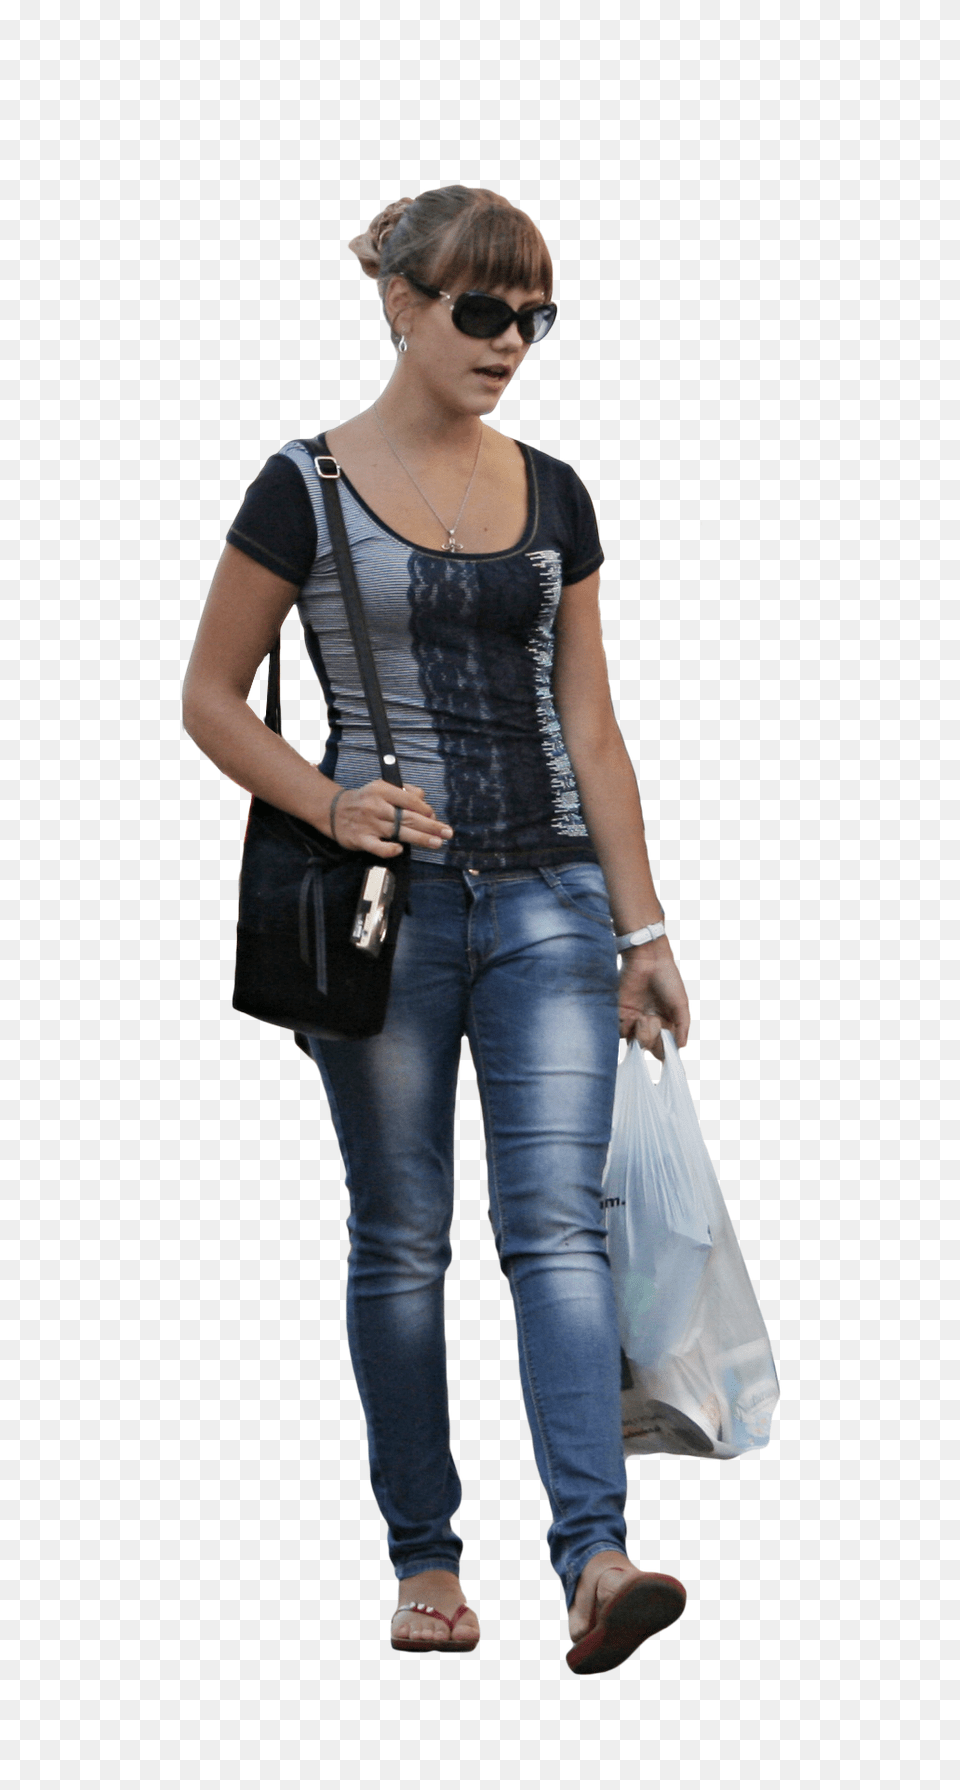 Cut Out People People Cut Out Shopping Full Size Shopping Cut Out, Accessories, Pants, Jeans, Handbag Free Transparent Png